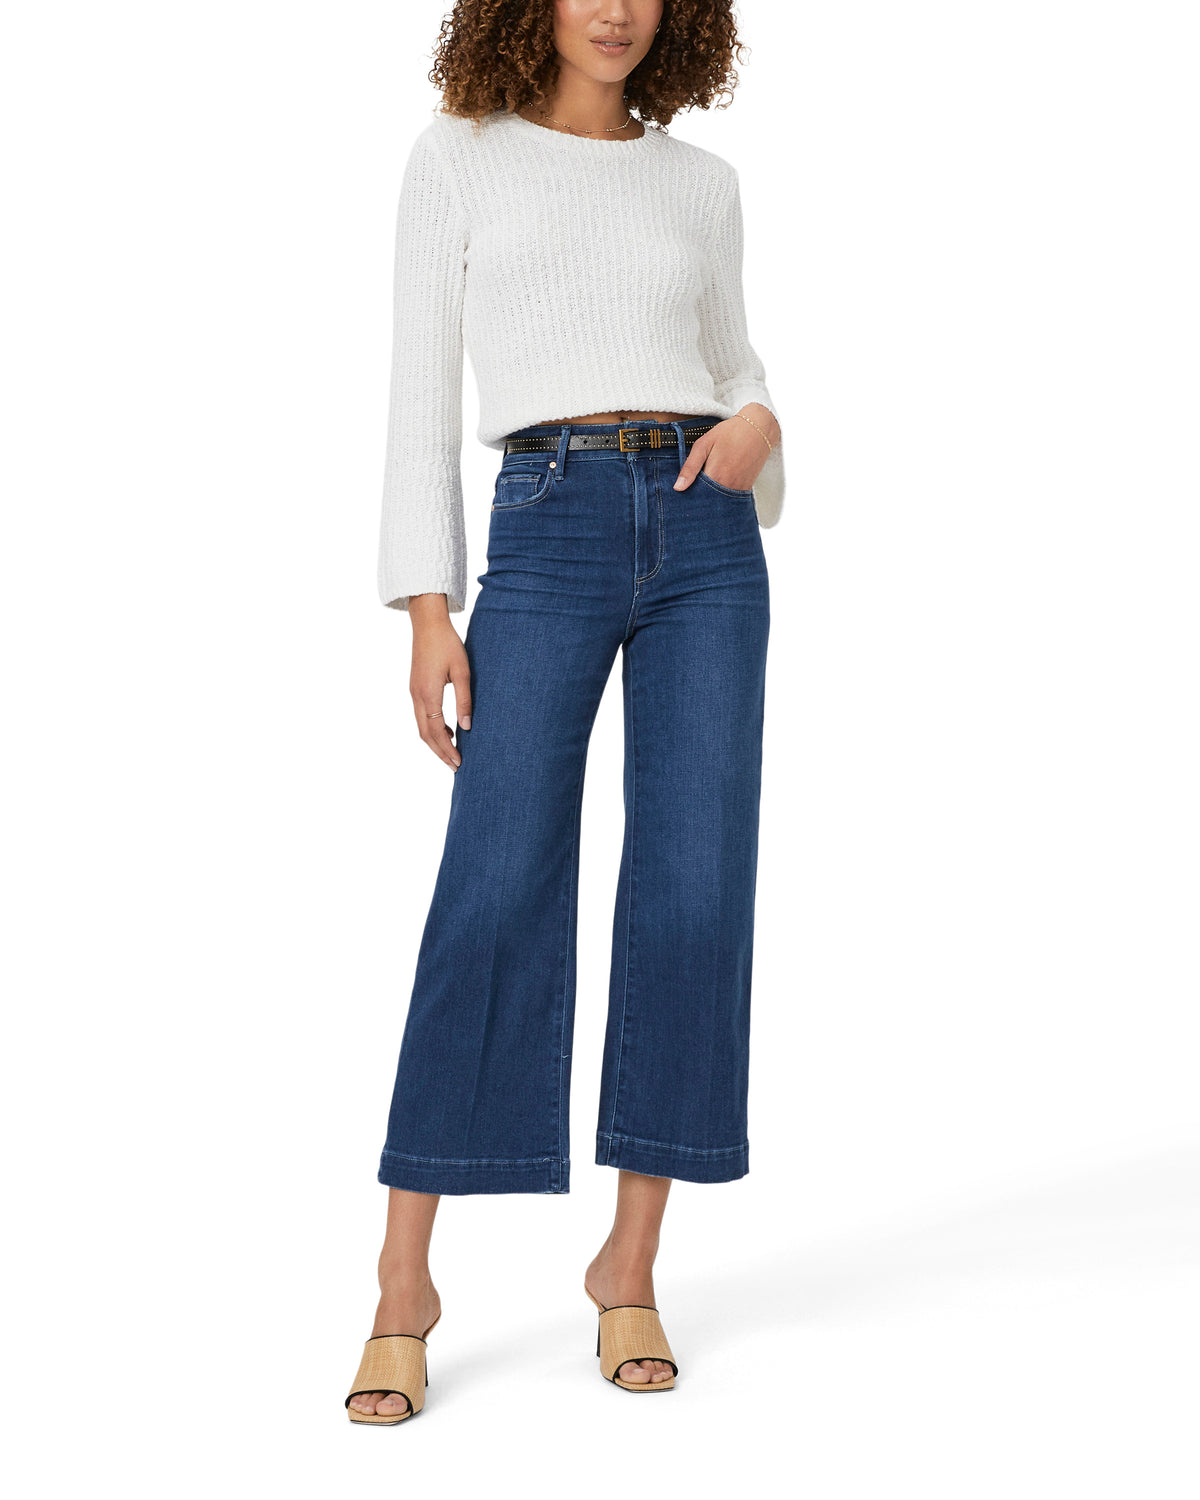 Ankle length wide leg jeans in s amid dark wash